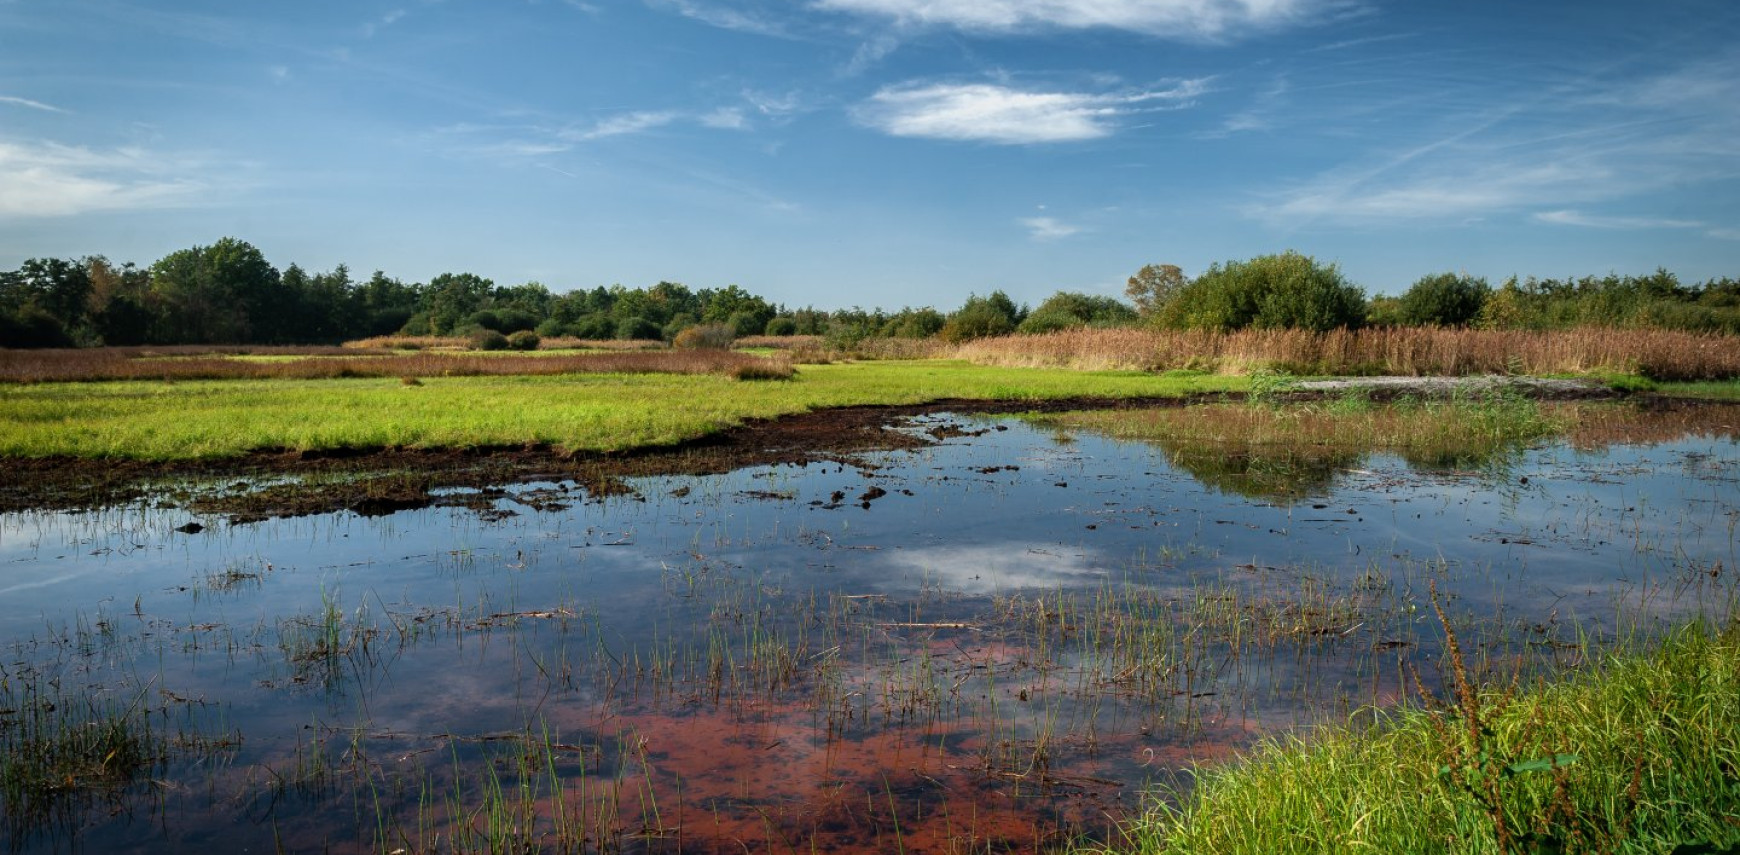 Peatlands must be rewetted to achieve climate neutrality